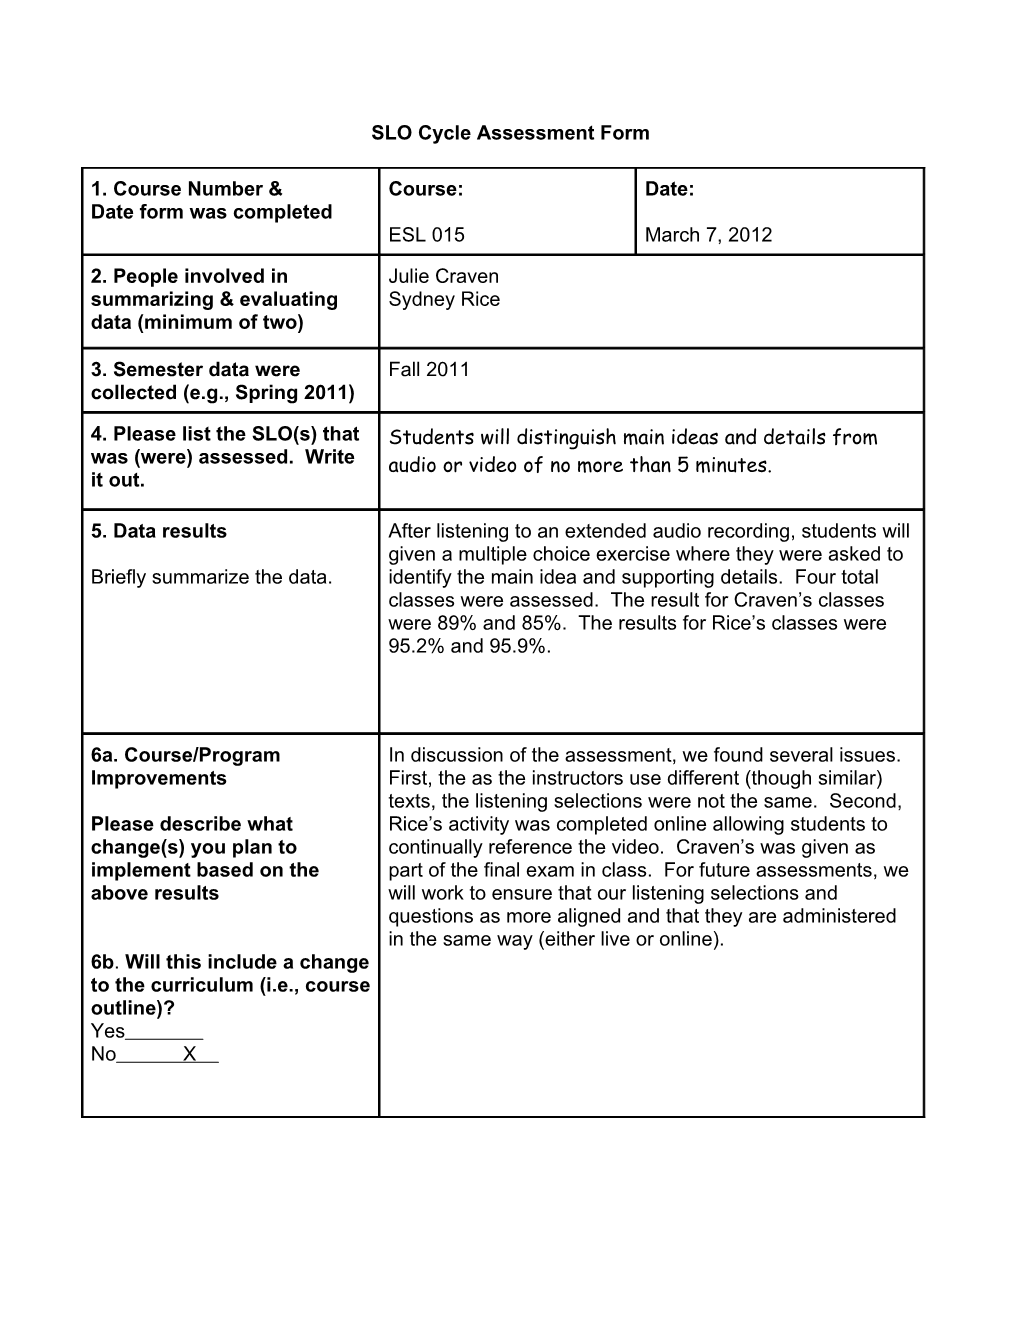 SLO Cycle Assessment Form